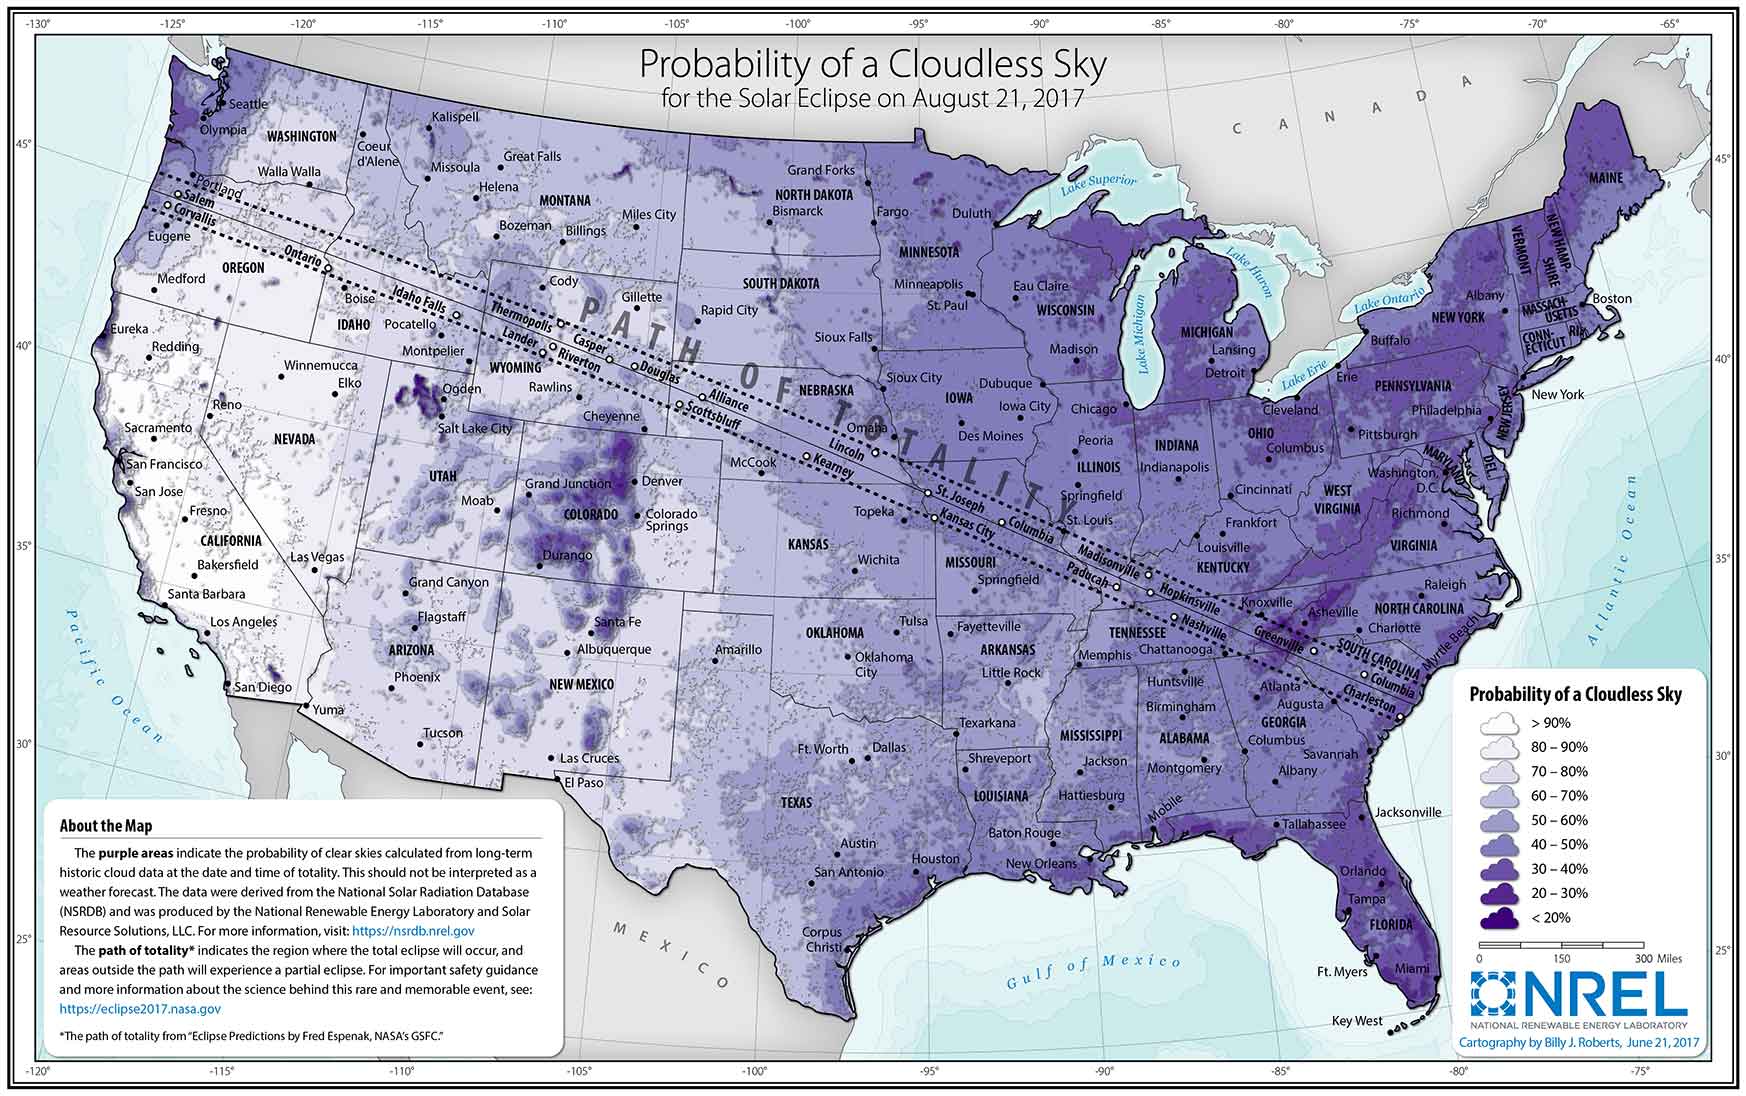 Image of the U.S. map showing the clear-sky probabilities along the upcoming solar eclipse path.